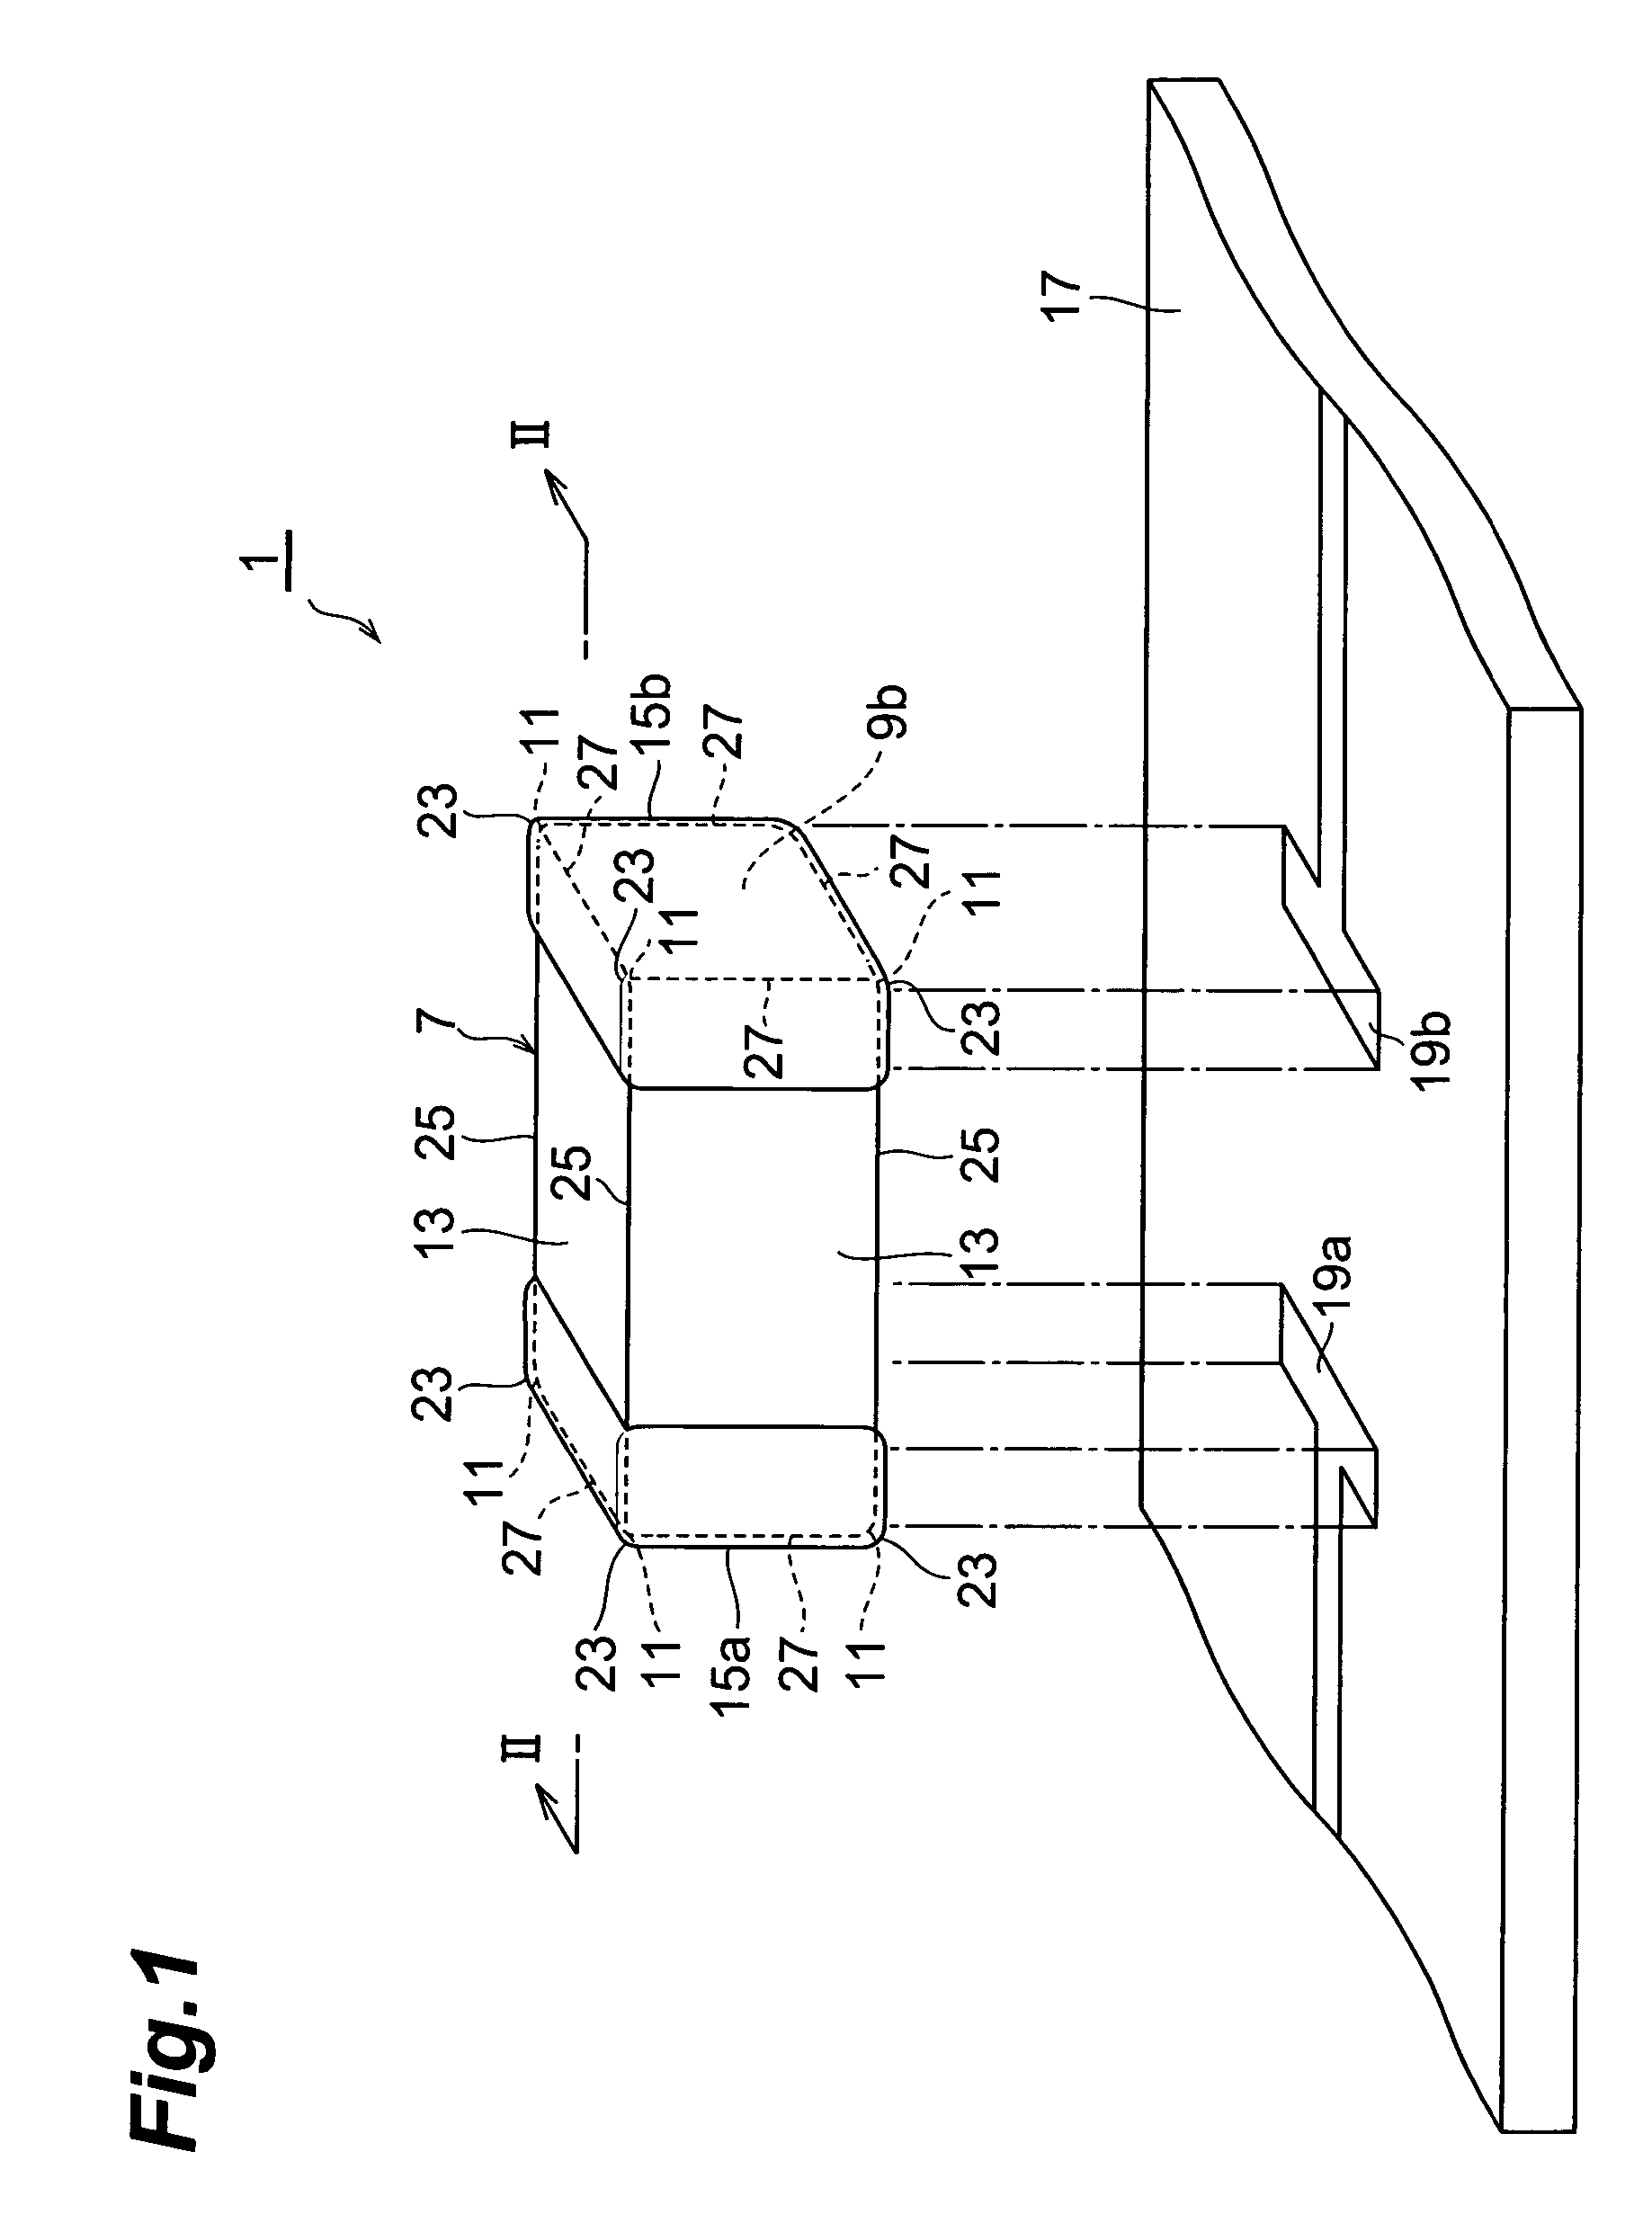 Surface mounted electronic component